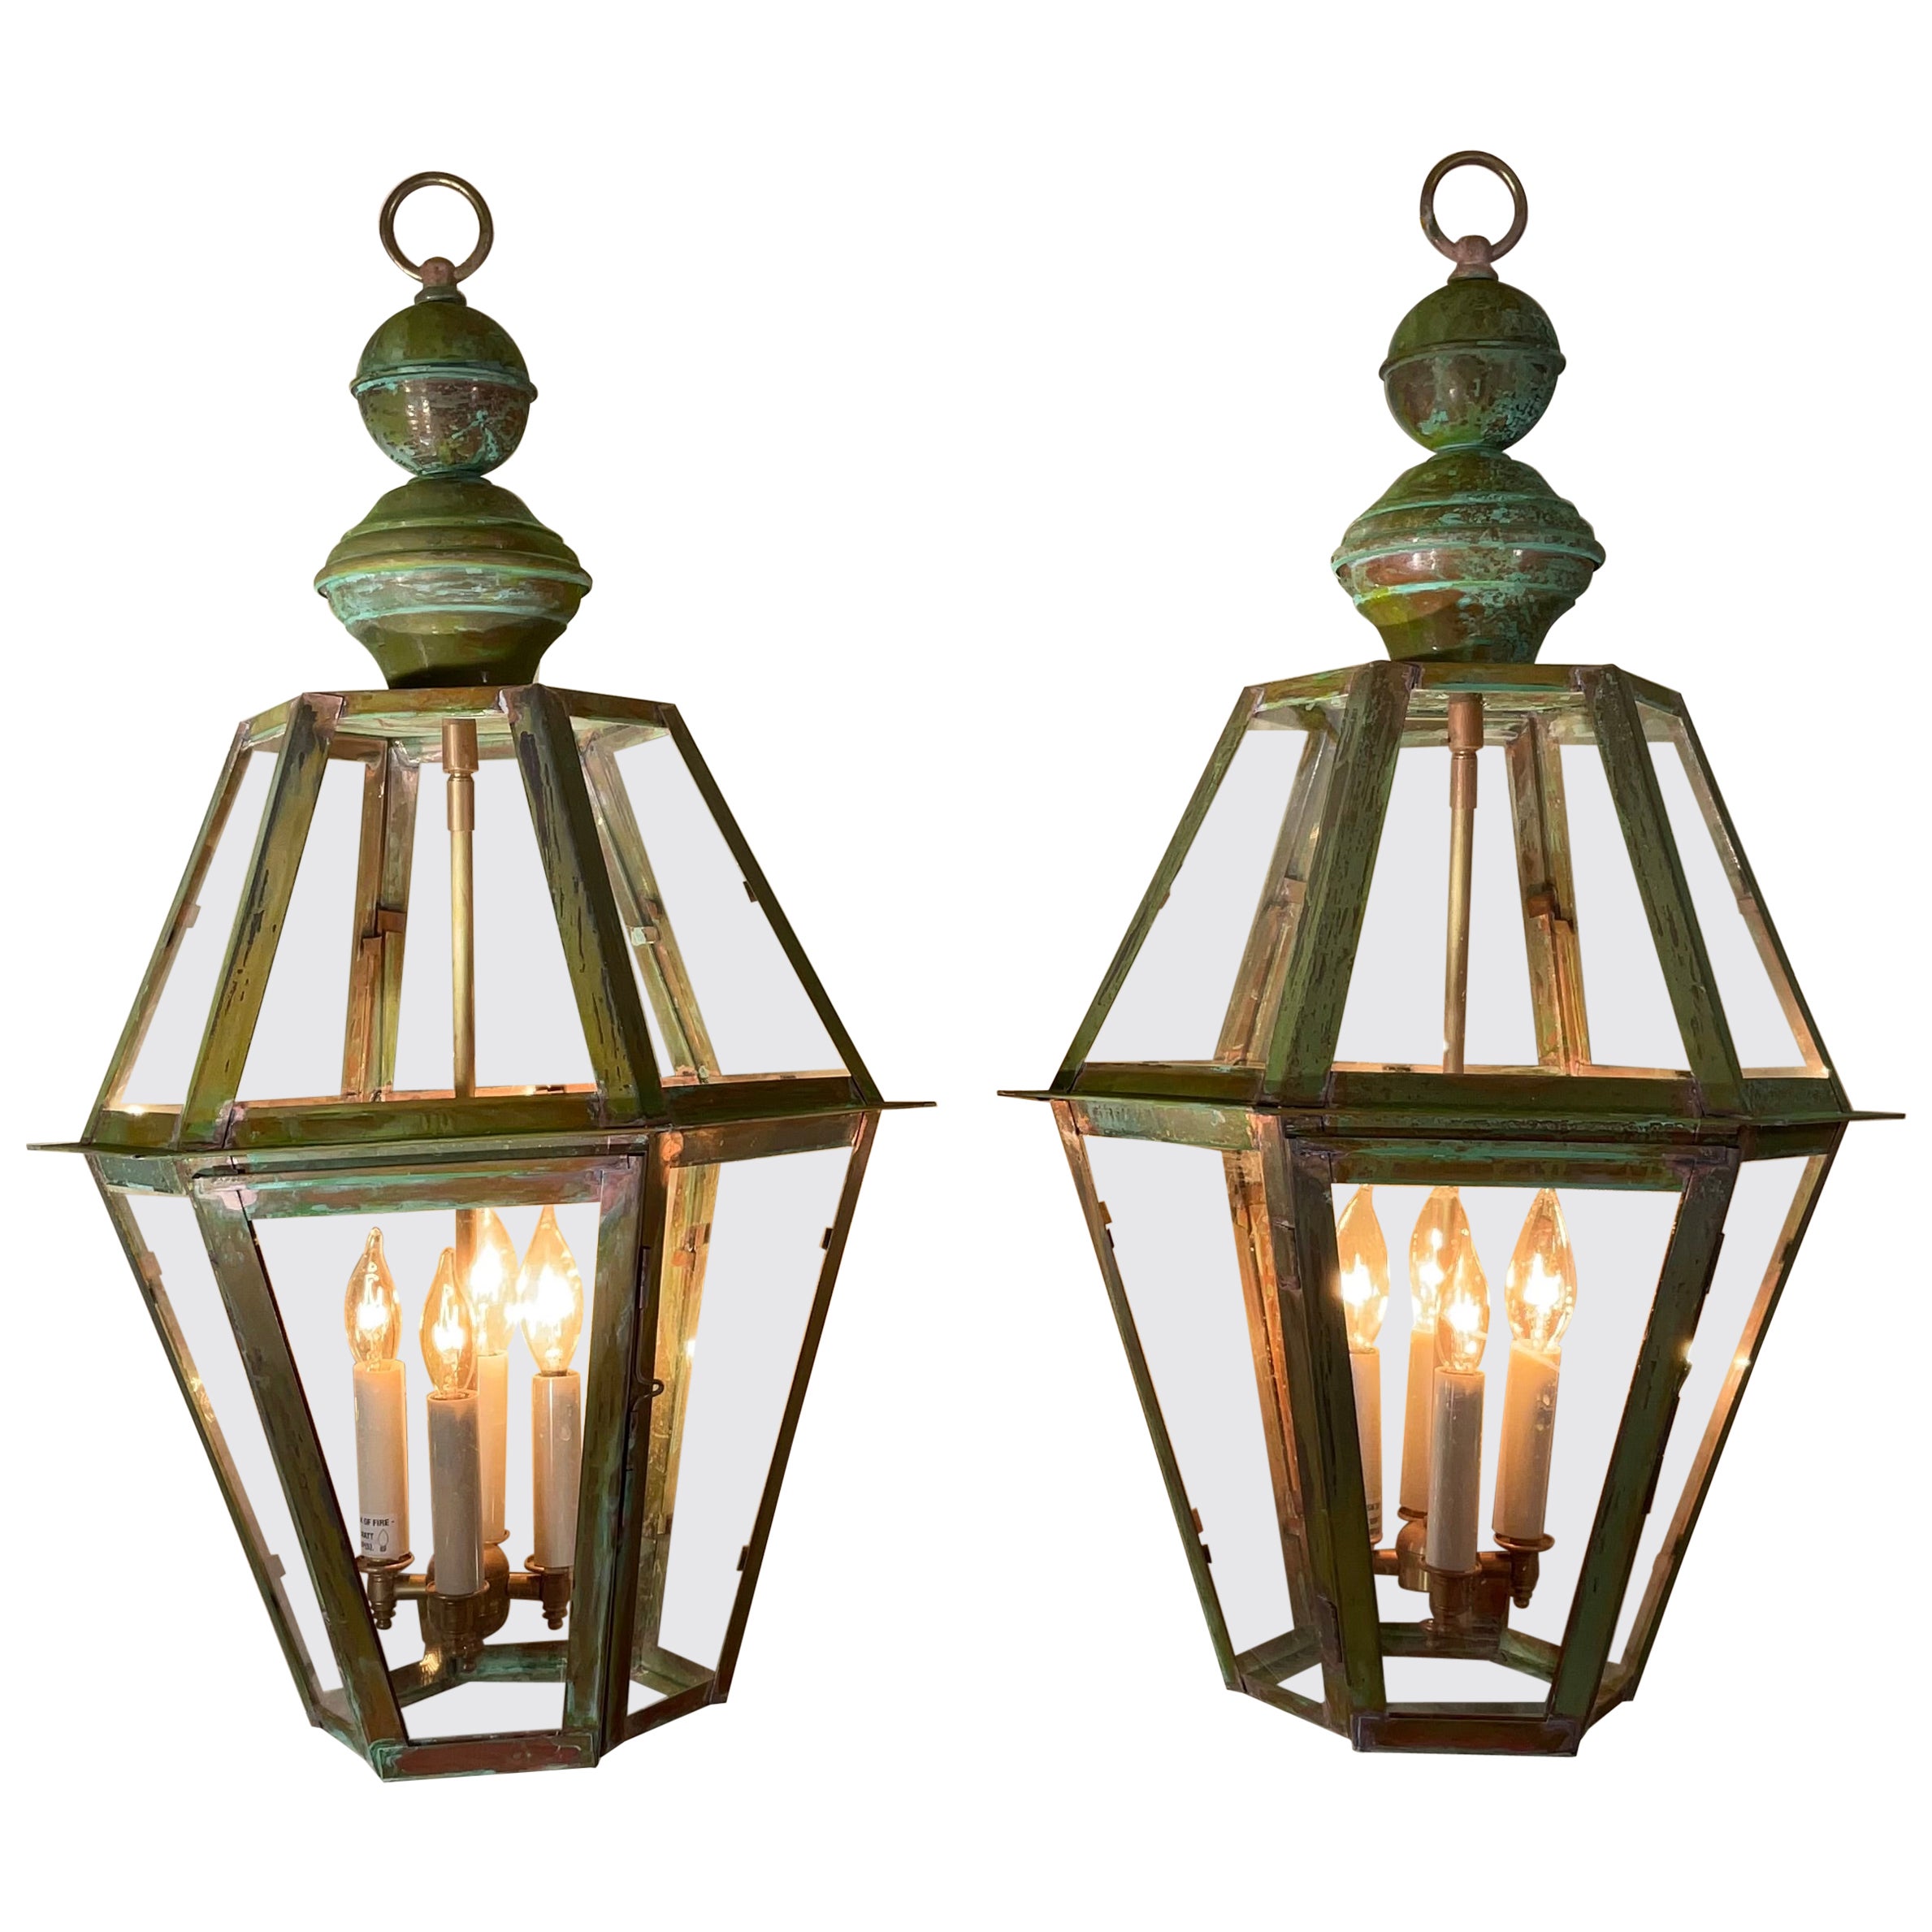 Pair Of Six Sides Solid Copper And Brass Handcrafted Hanging Lanterns